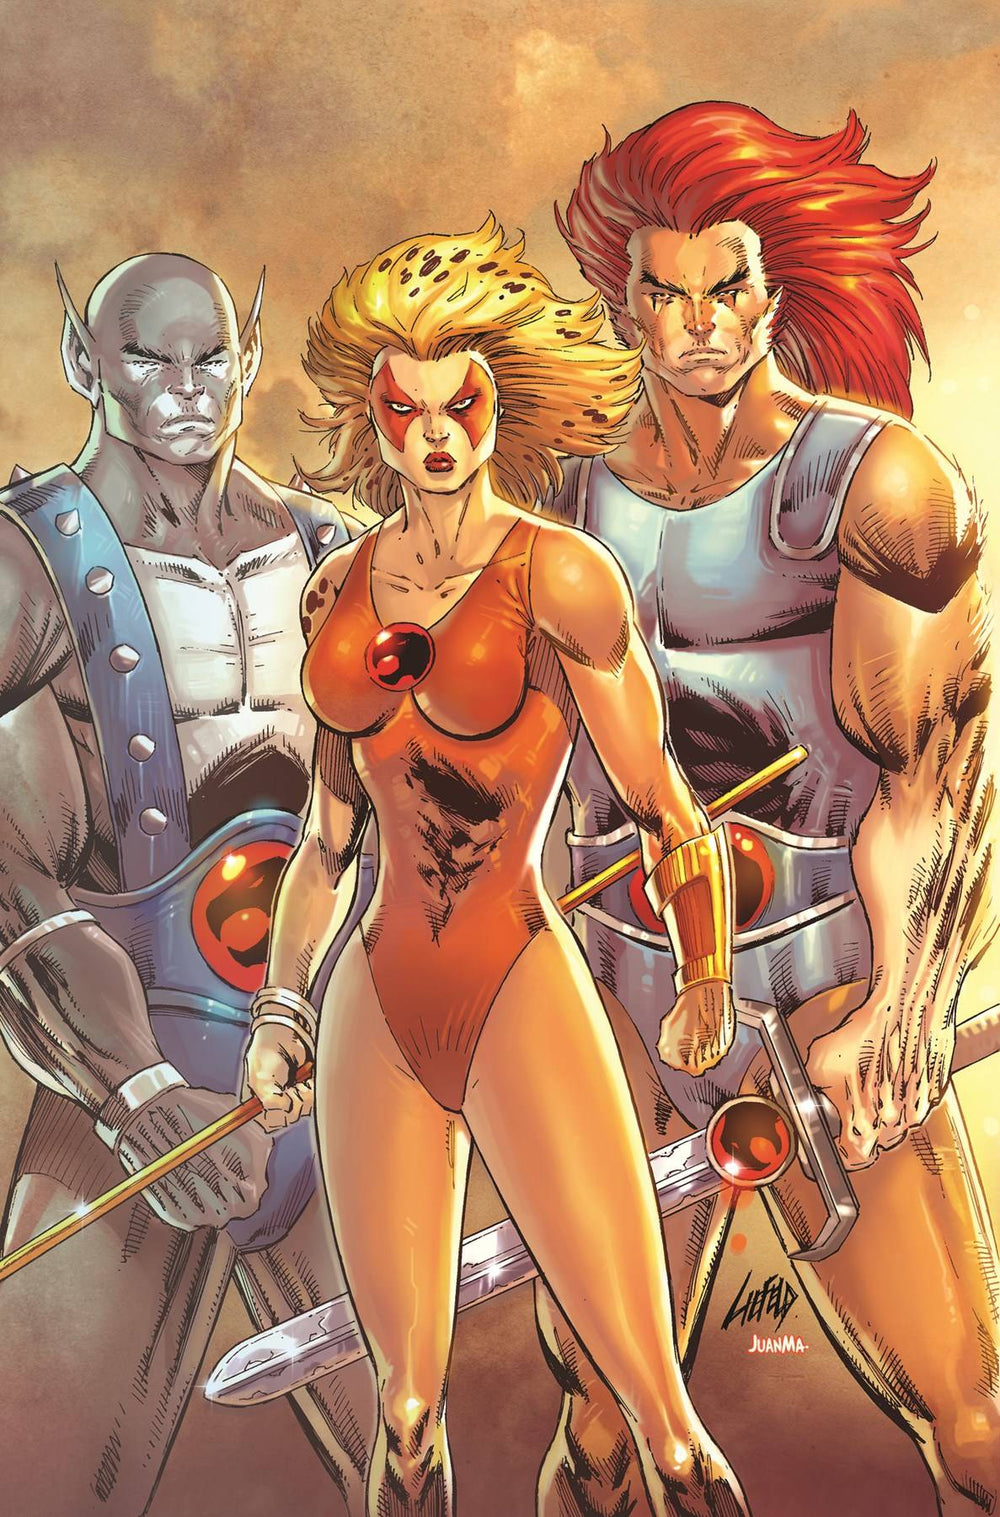 THUNDERCATS #3 INCENTIVE COVER 1:15 BY ROB LIEFELD